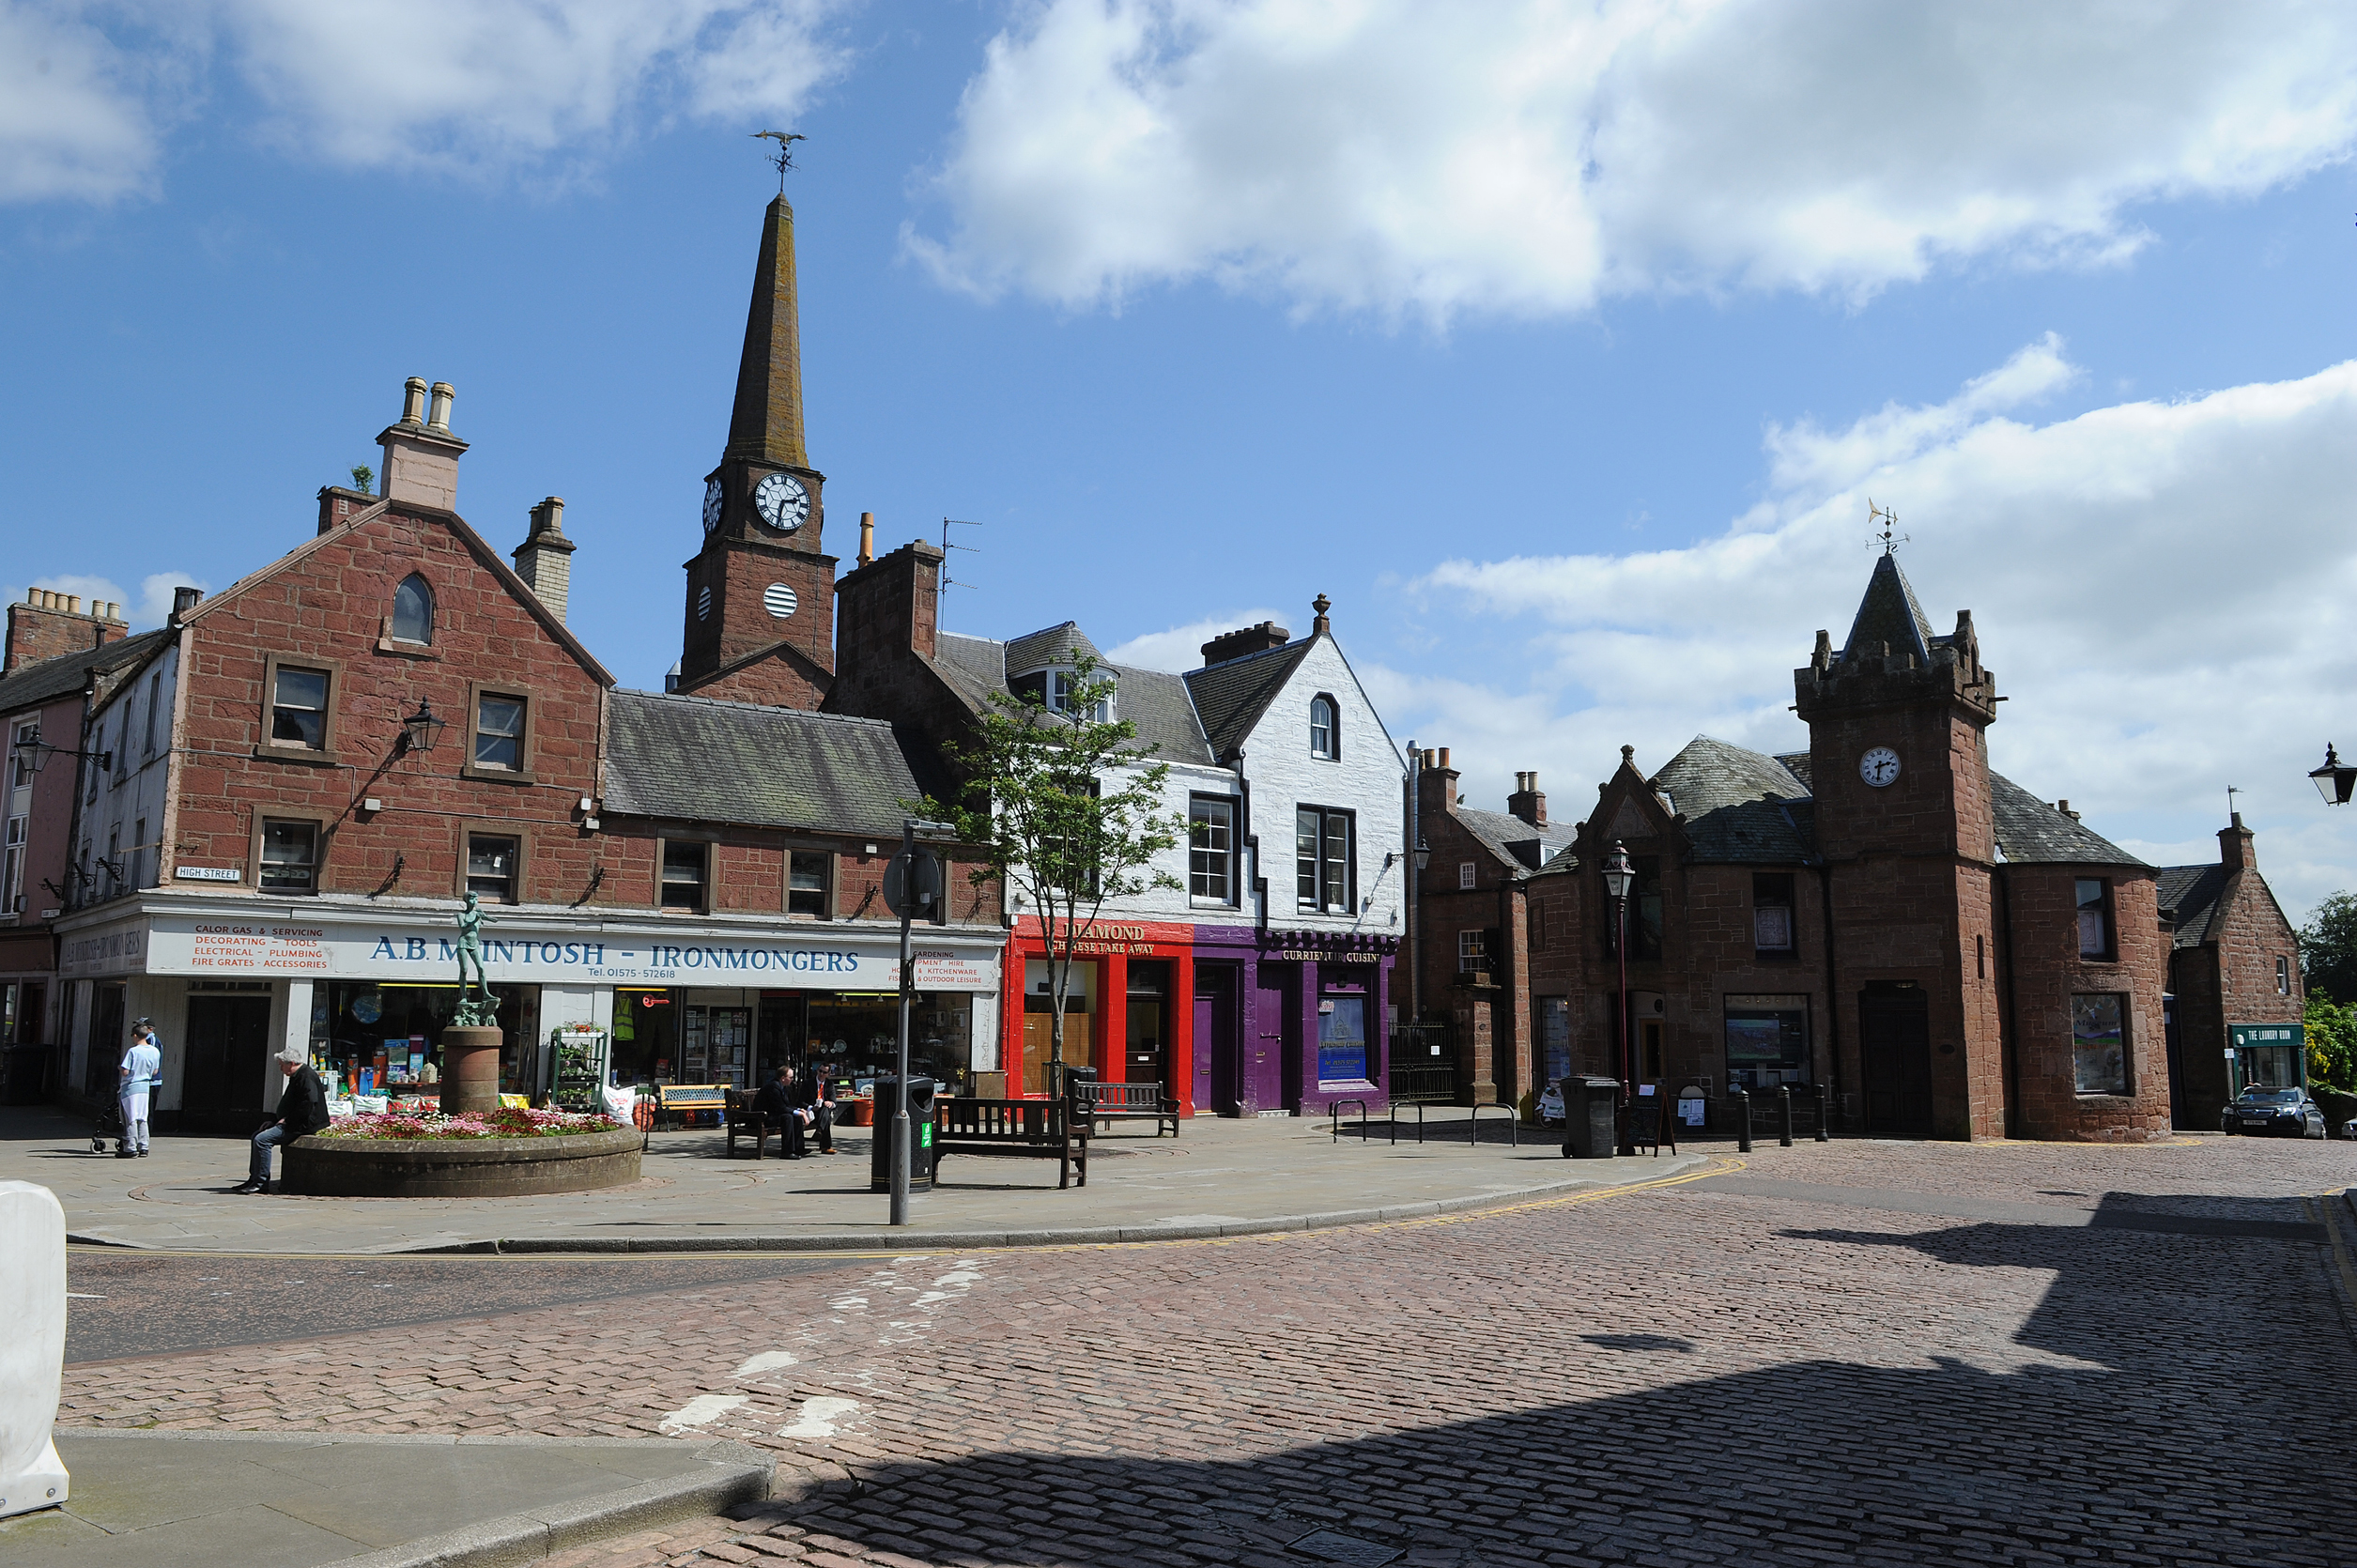 Project looks at history of the people of Kirriemuir and the town's trades.